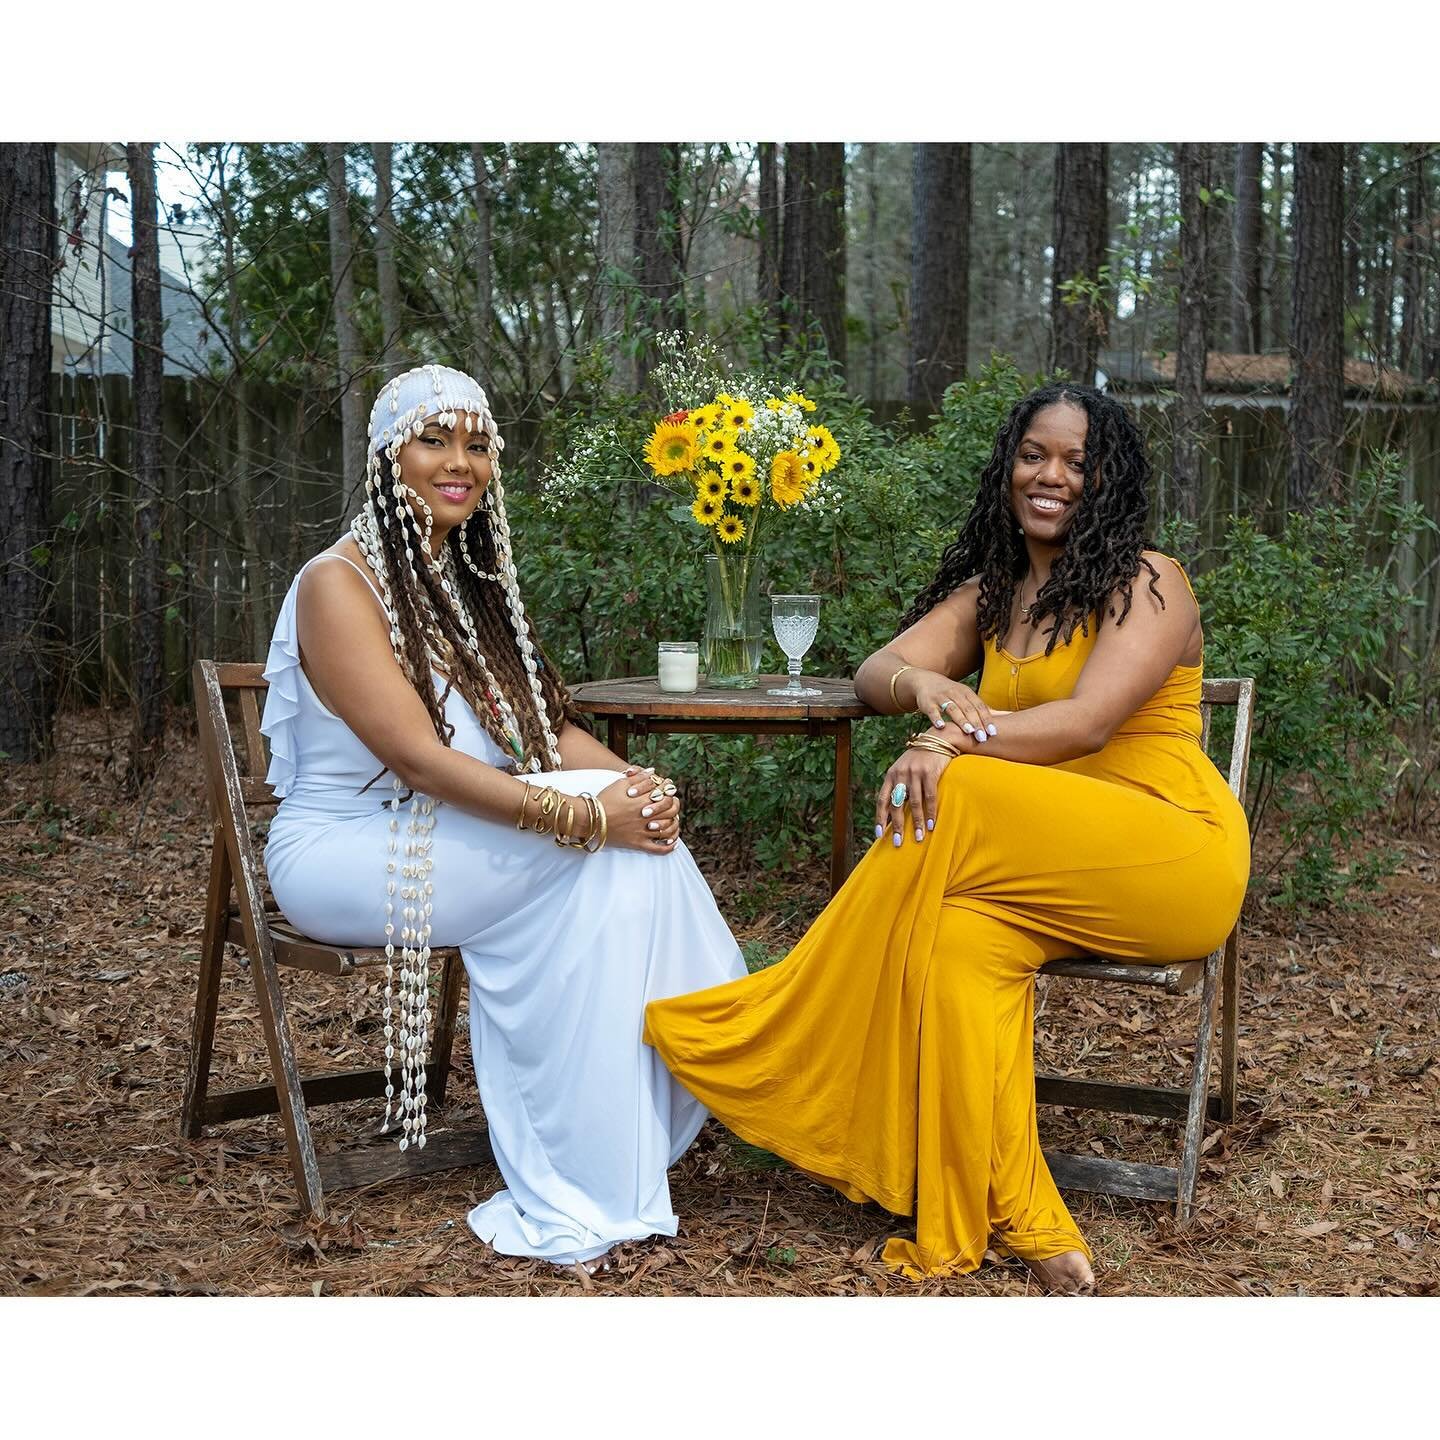 IMPACT Vol. 3 No. 1 features a new installment of Krak Teet corner! Author Trelani Michelle interviews Kamilah KaMaat, founder of Sankofa House, with photos by Joshua Lindsey

Join us for the Magazine Release Party on Friday, June 7th from 5 - 9PM du